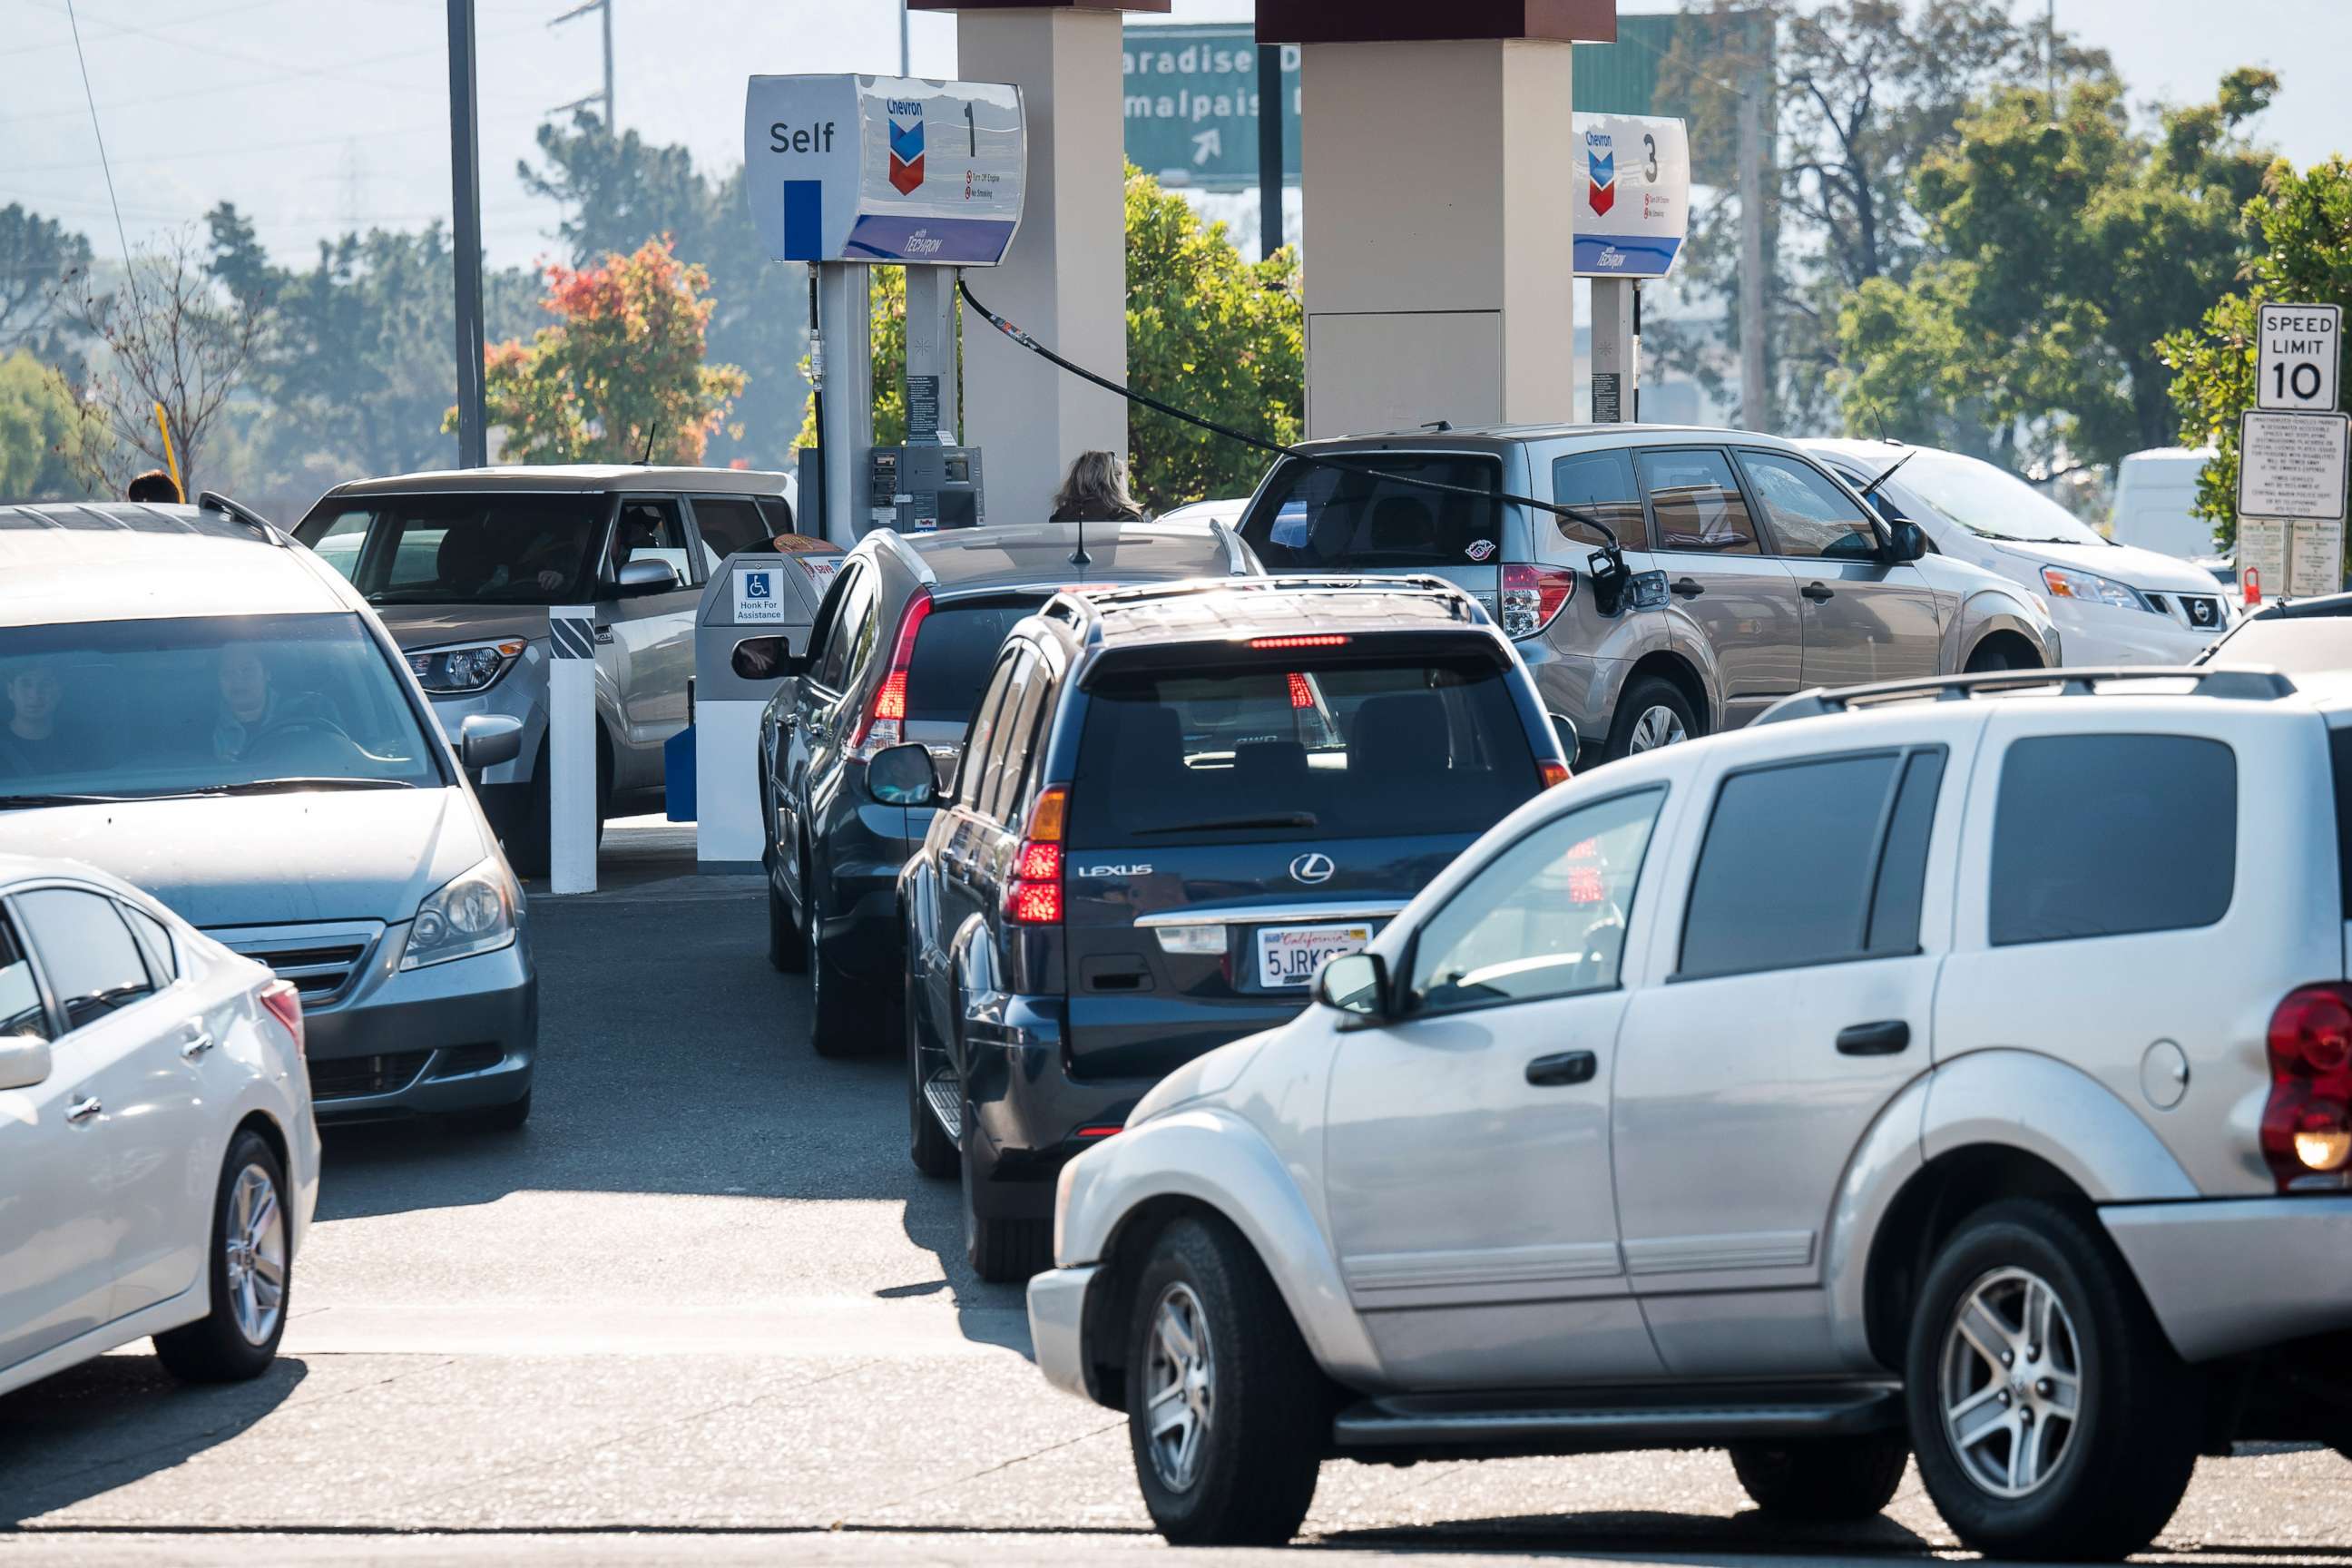 PHOTO: Customers wait in line to get gas at a gas station in Corte Madera, Calif., Oct. 29, 2019.